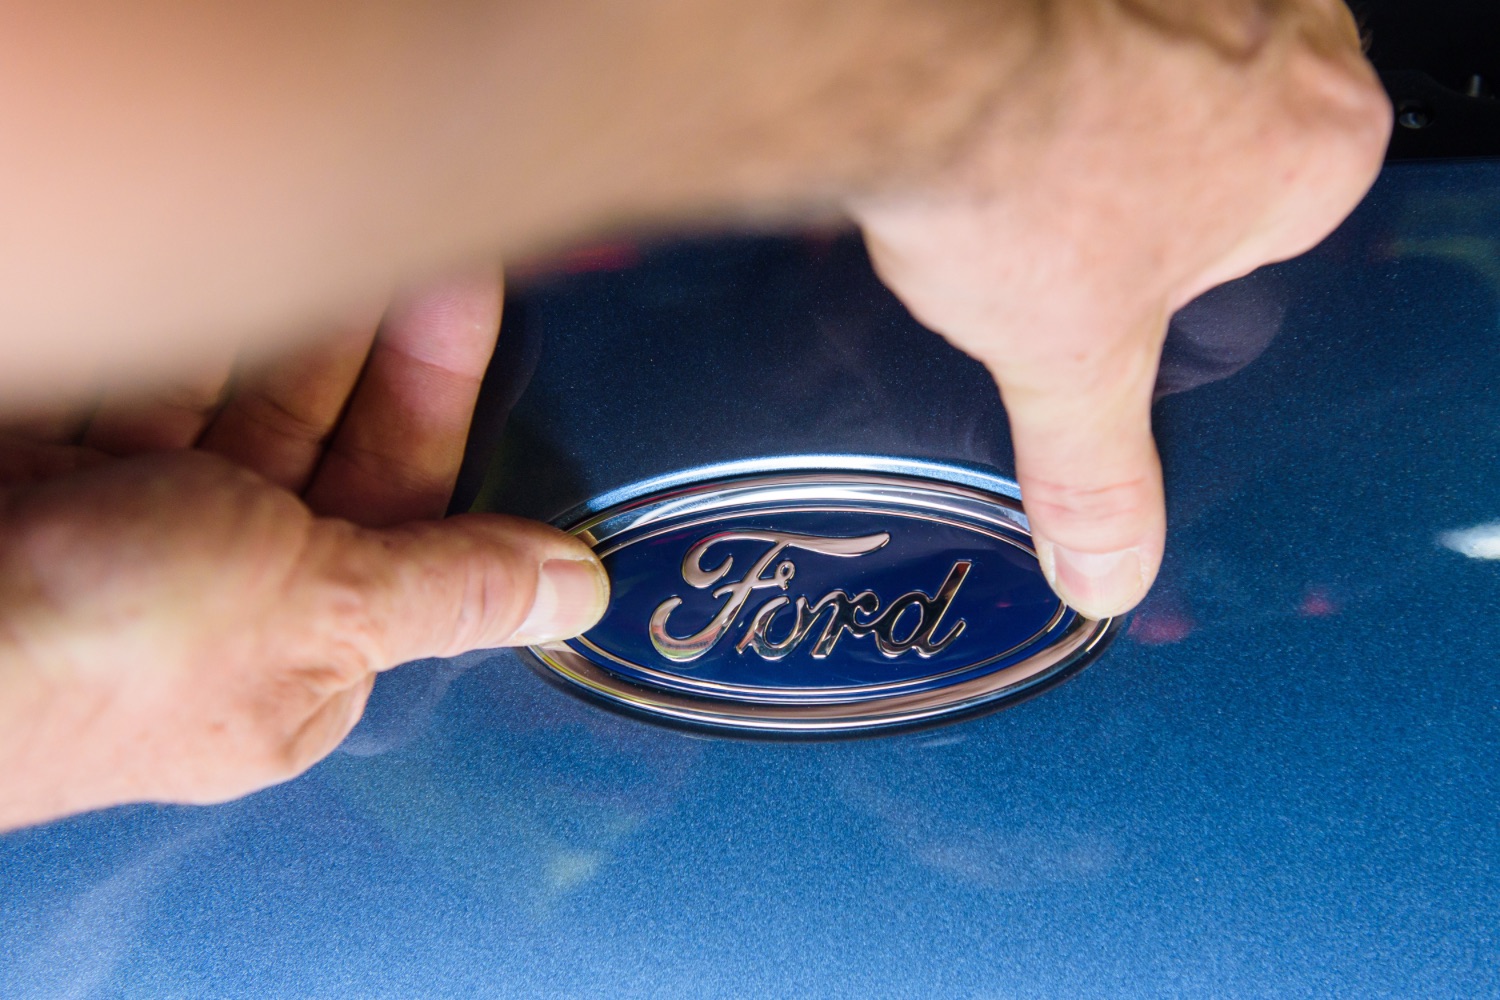 Car News | Ford cars could re-possess themselves